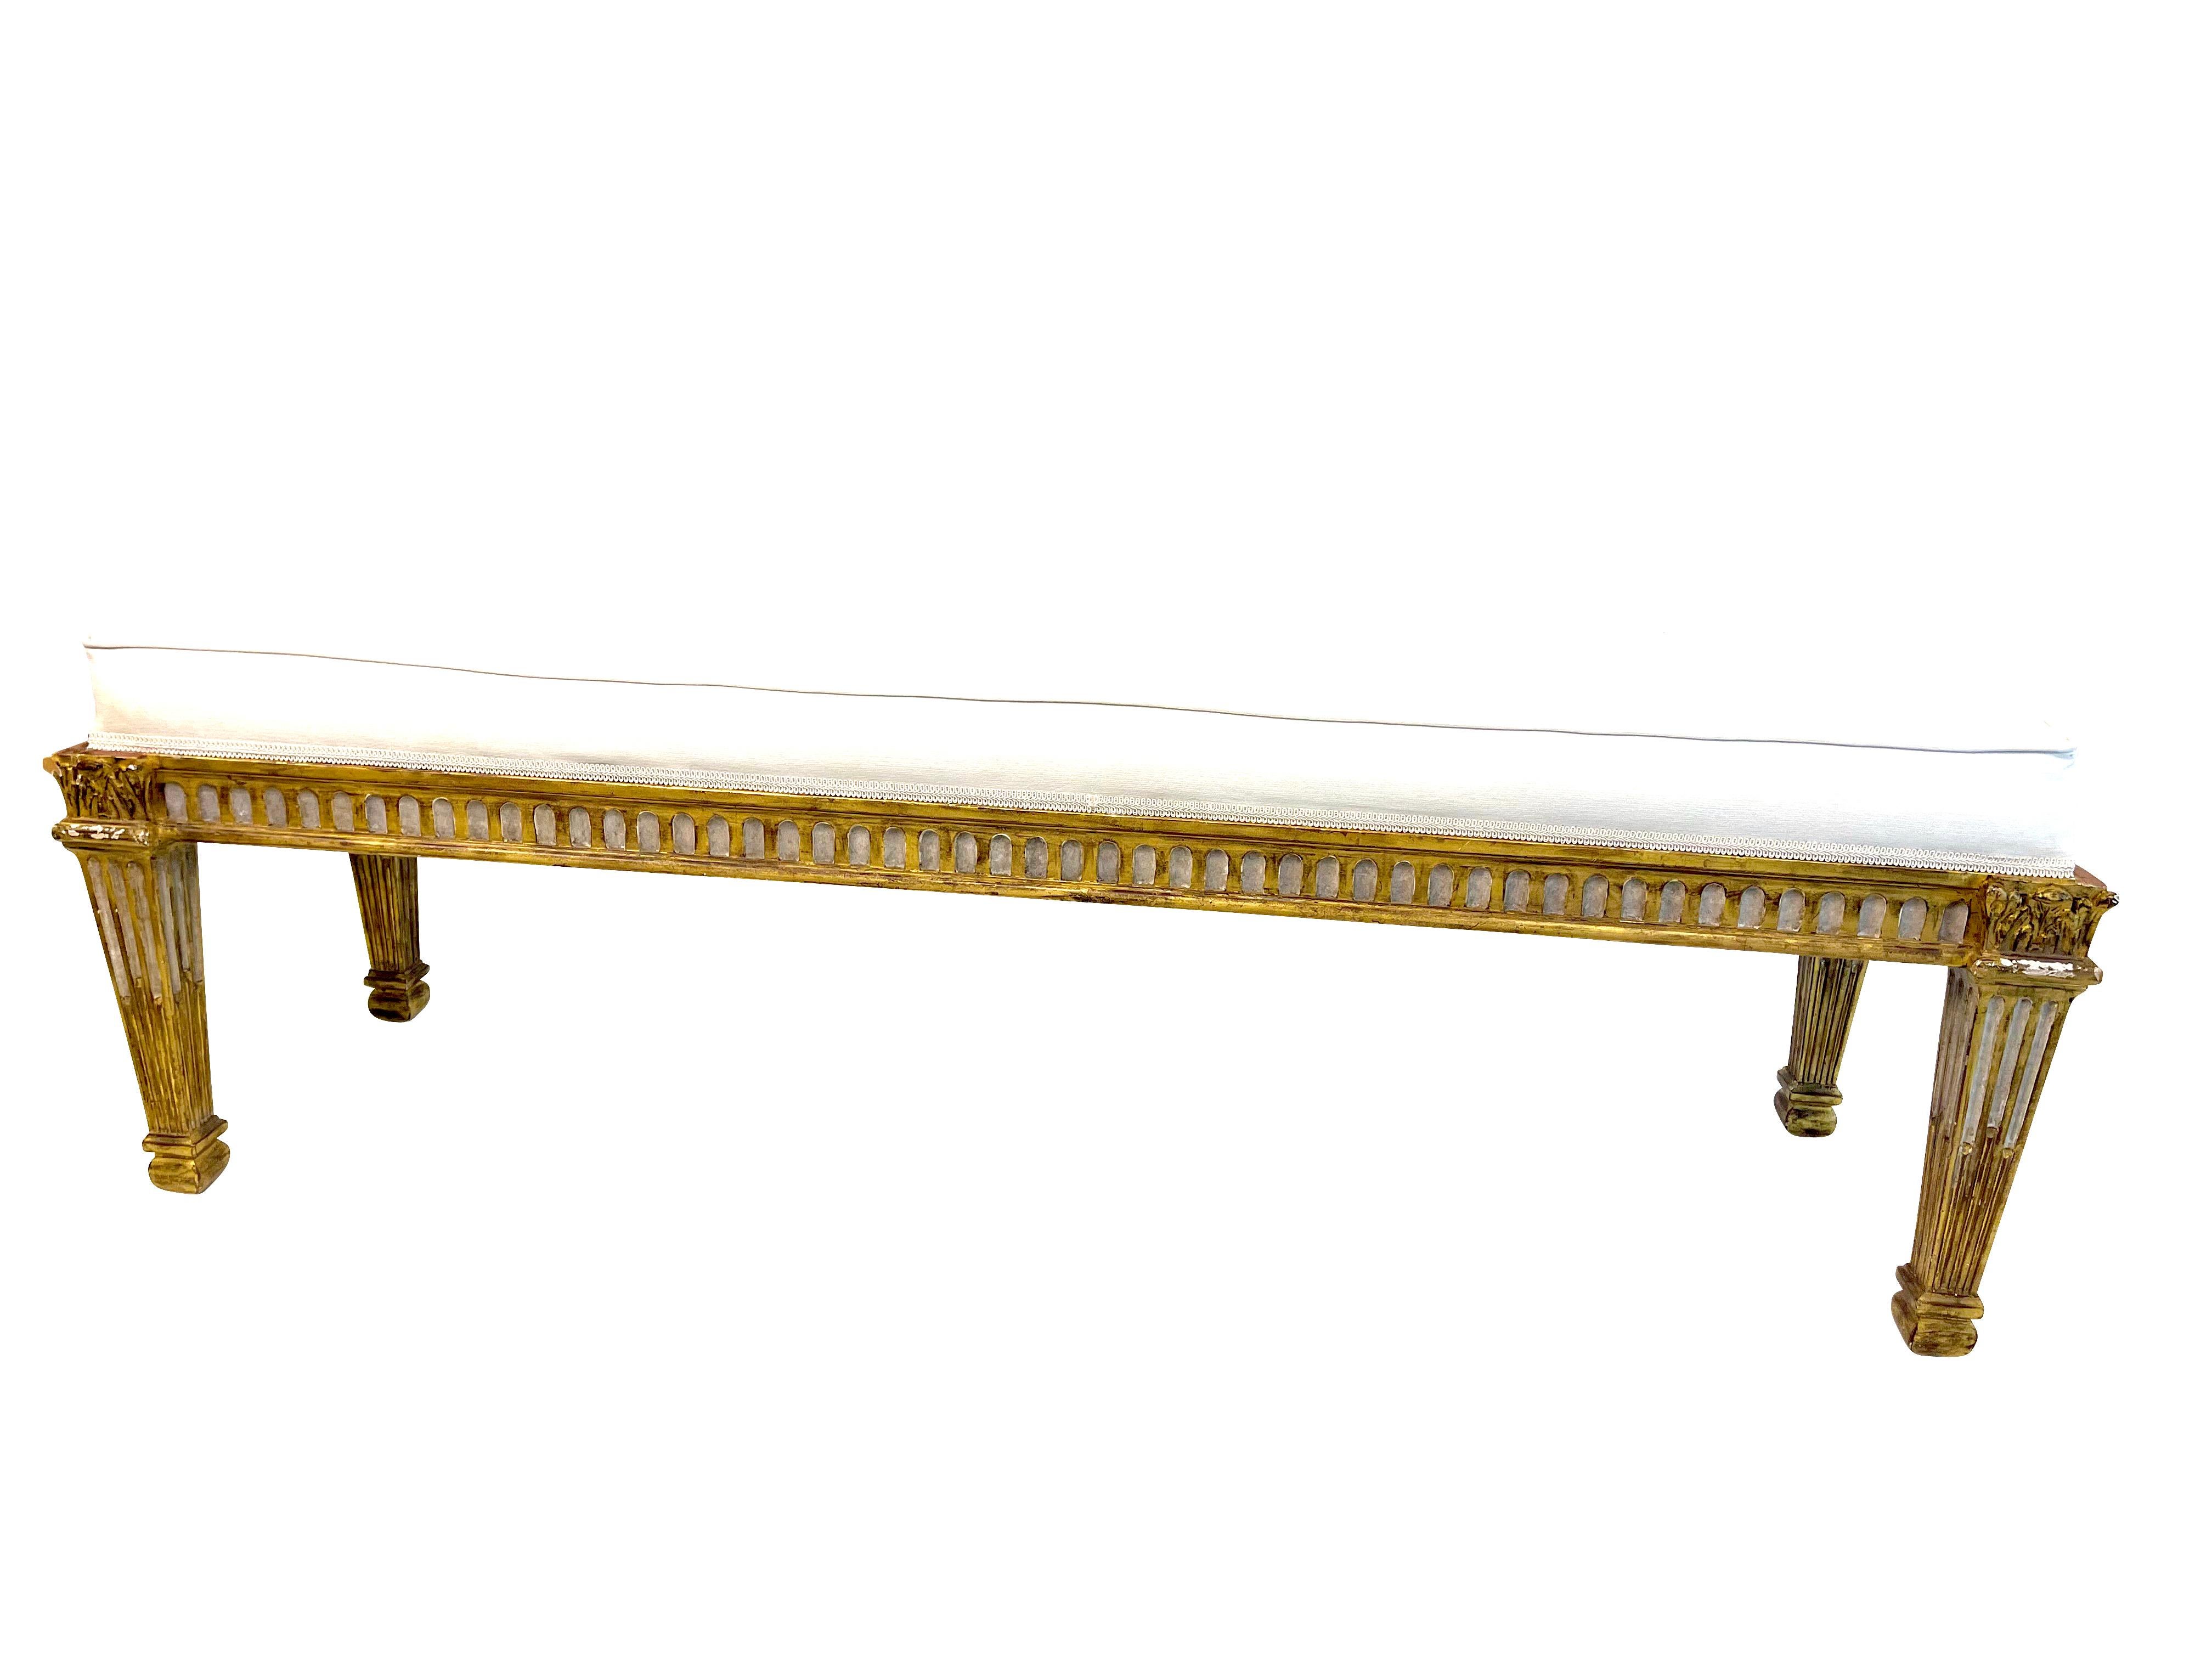 A decorative Louis XV-style gilt banquette or low bench perfect for the foot of your bed or in front of a fireplace. Highly decorative in gilt decoration with grey painted accents. Reeded legs and apron. This piece has been professionally